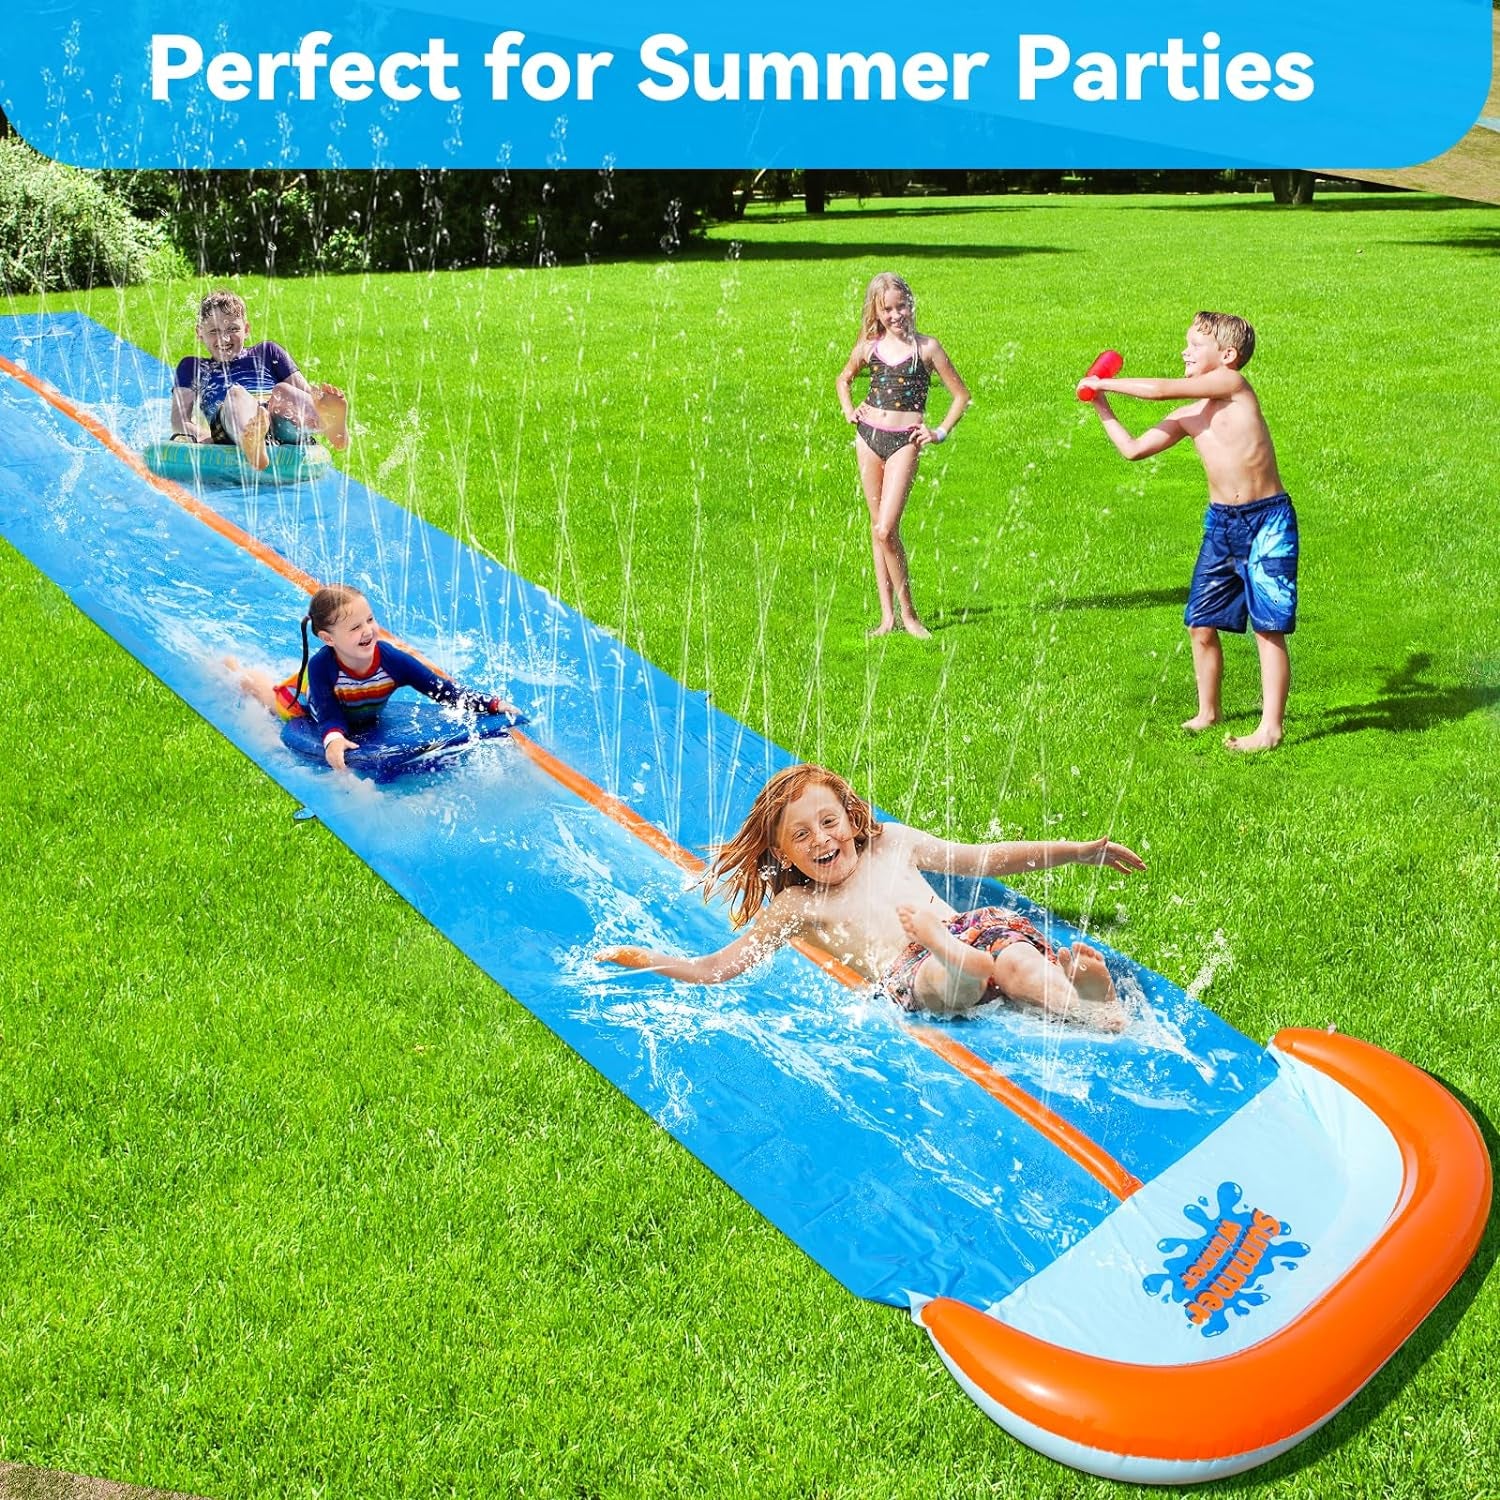 30FT Slip Lawn Water Slide, Extra Long Slip Splash and Slide for Kids and Adults Backyard, with 2 Sliding Lanes and 2 Inflatable Bodyboards with Central-Pipe Sprinkler, Outdoor Summer Water Toy…